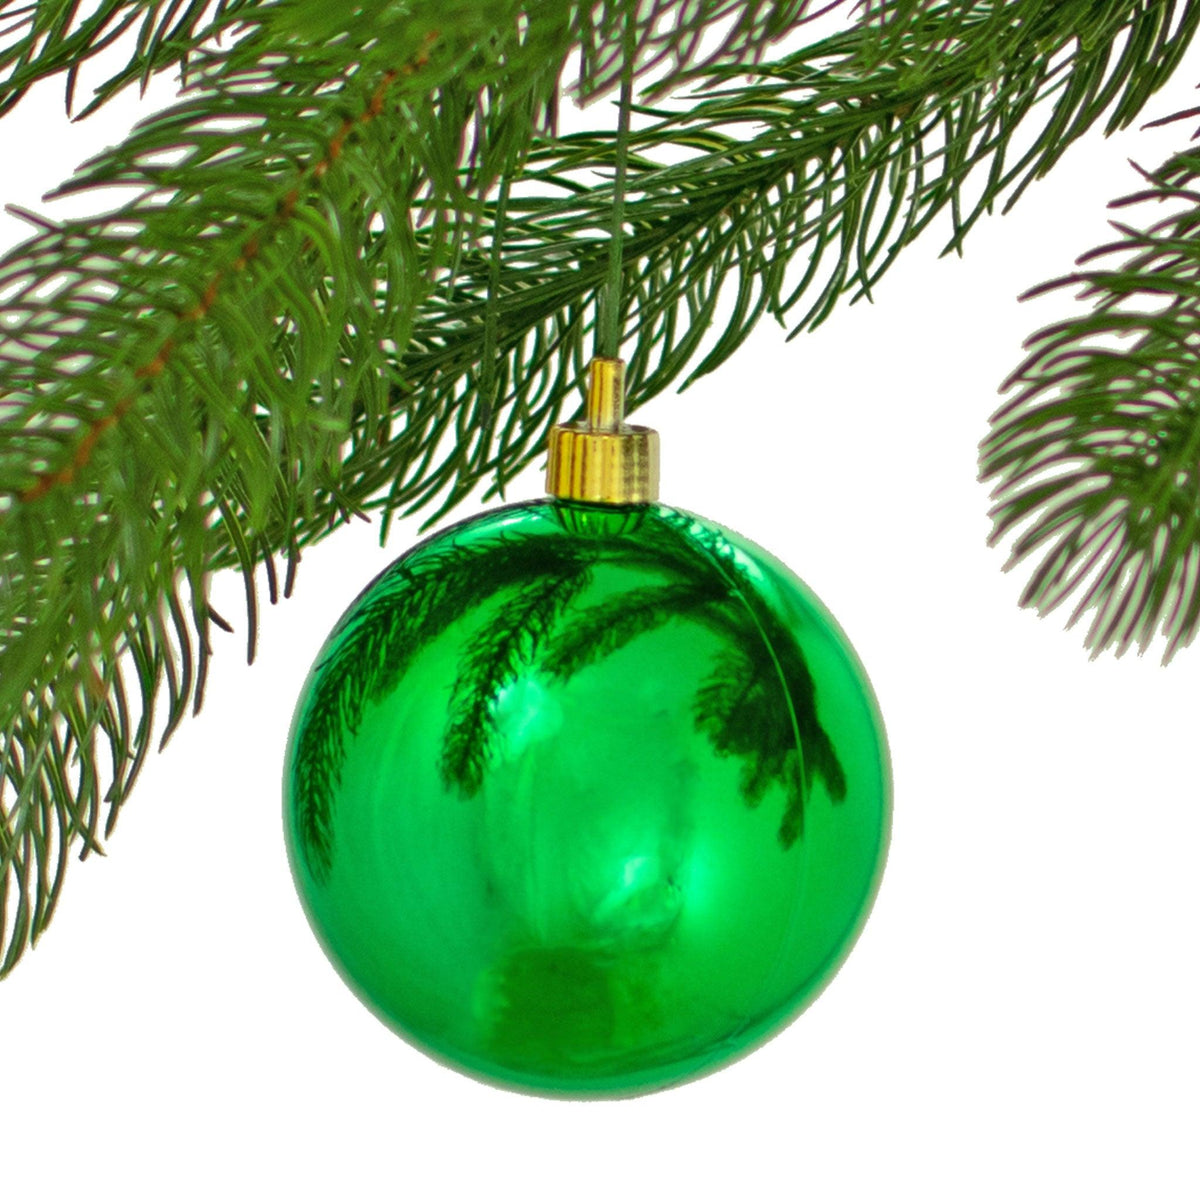 Lee Display offers brand new Shiny Green Plastic Ball Ornaments at wholesale prices for affordable Christmas Tree Hanging and Holiday Decorating on sale at leedisplay.com